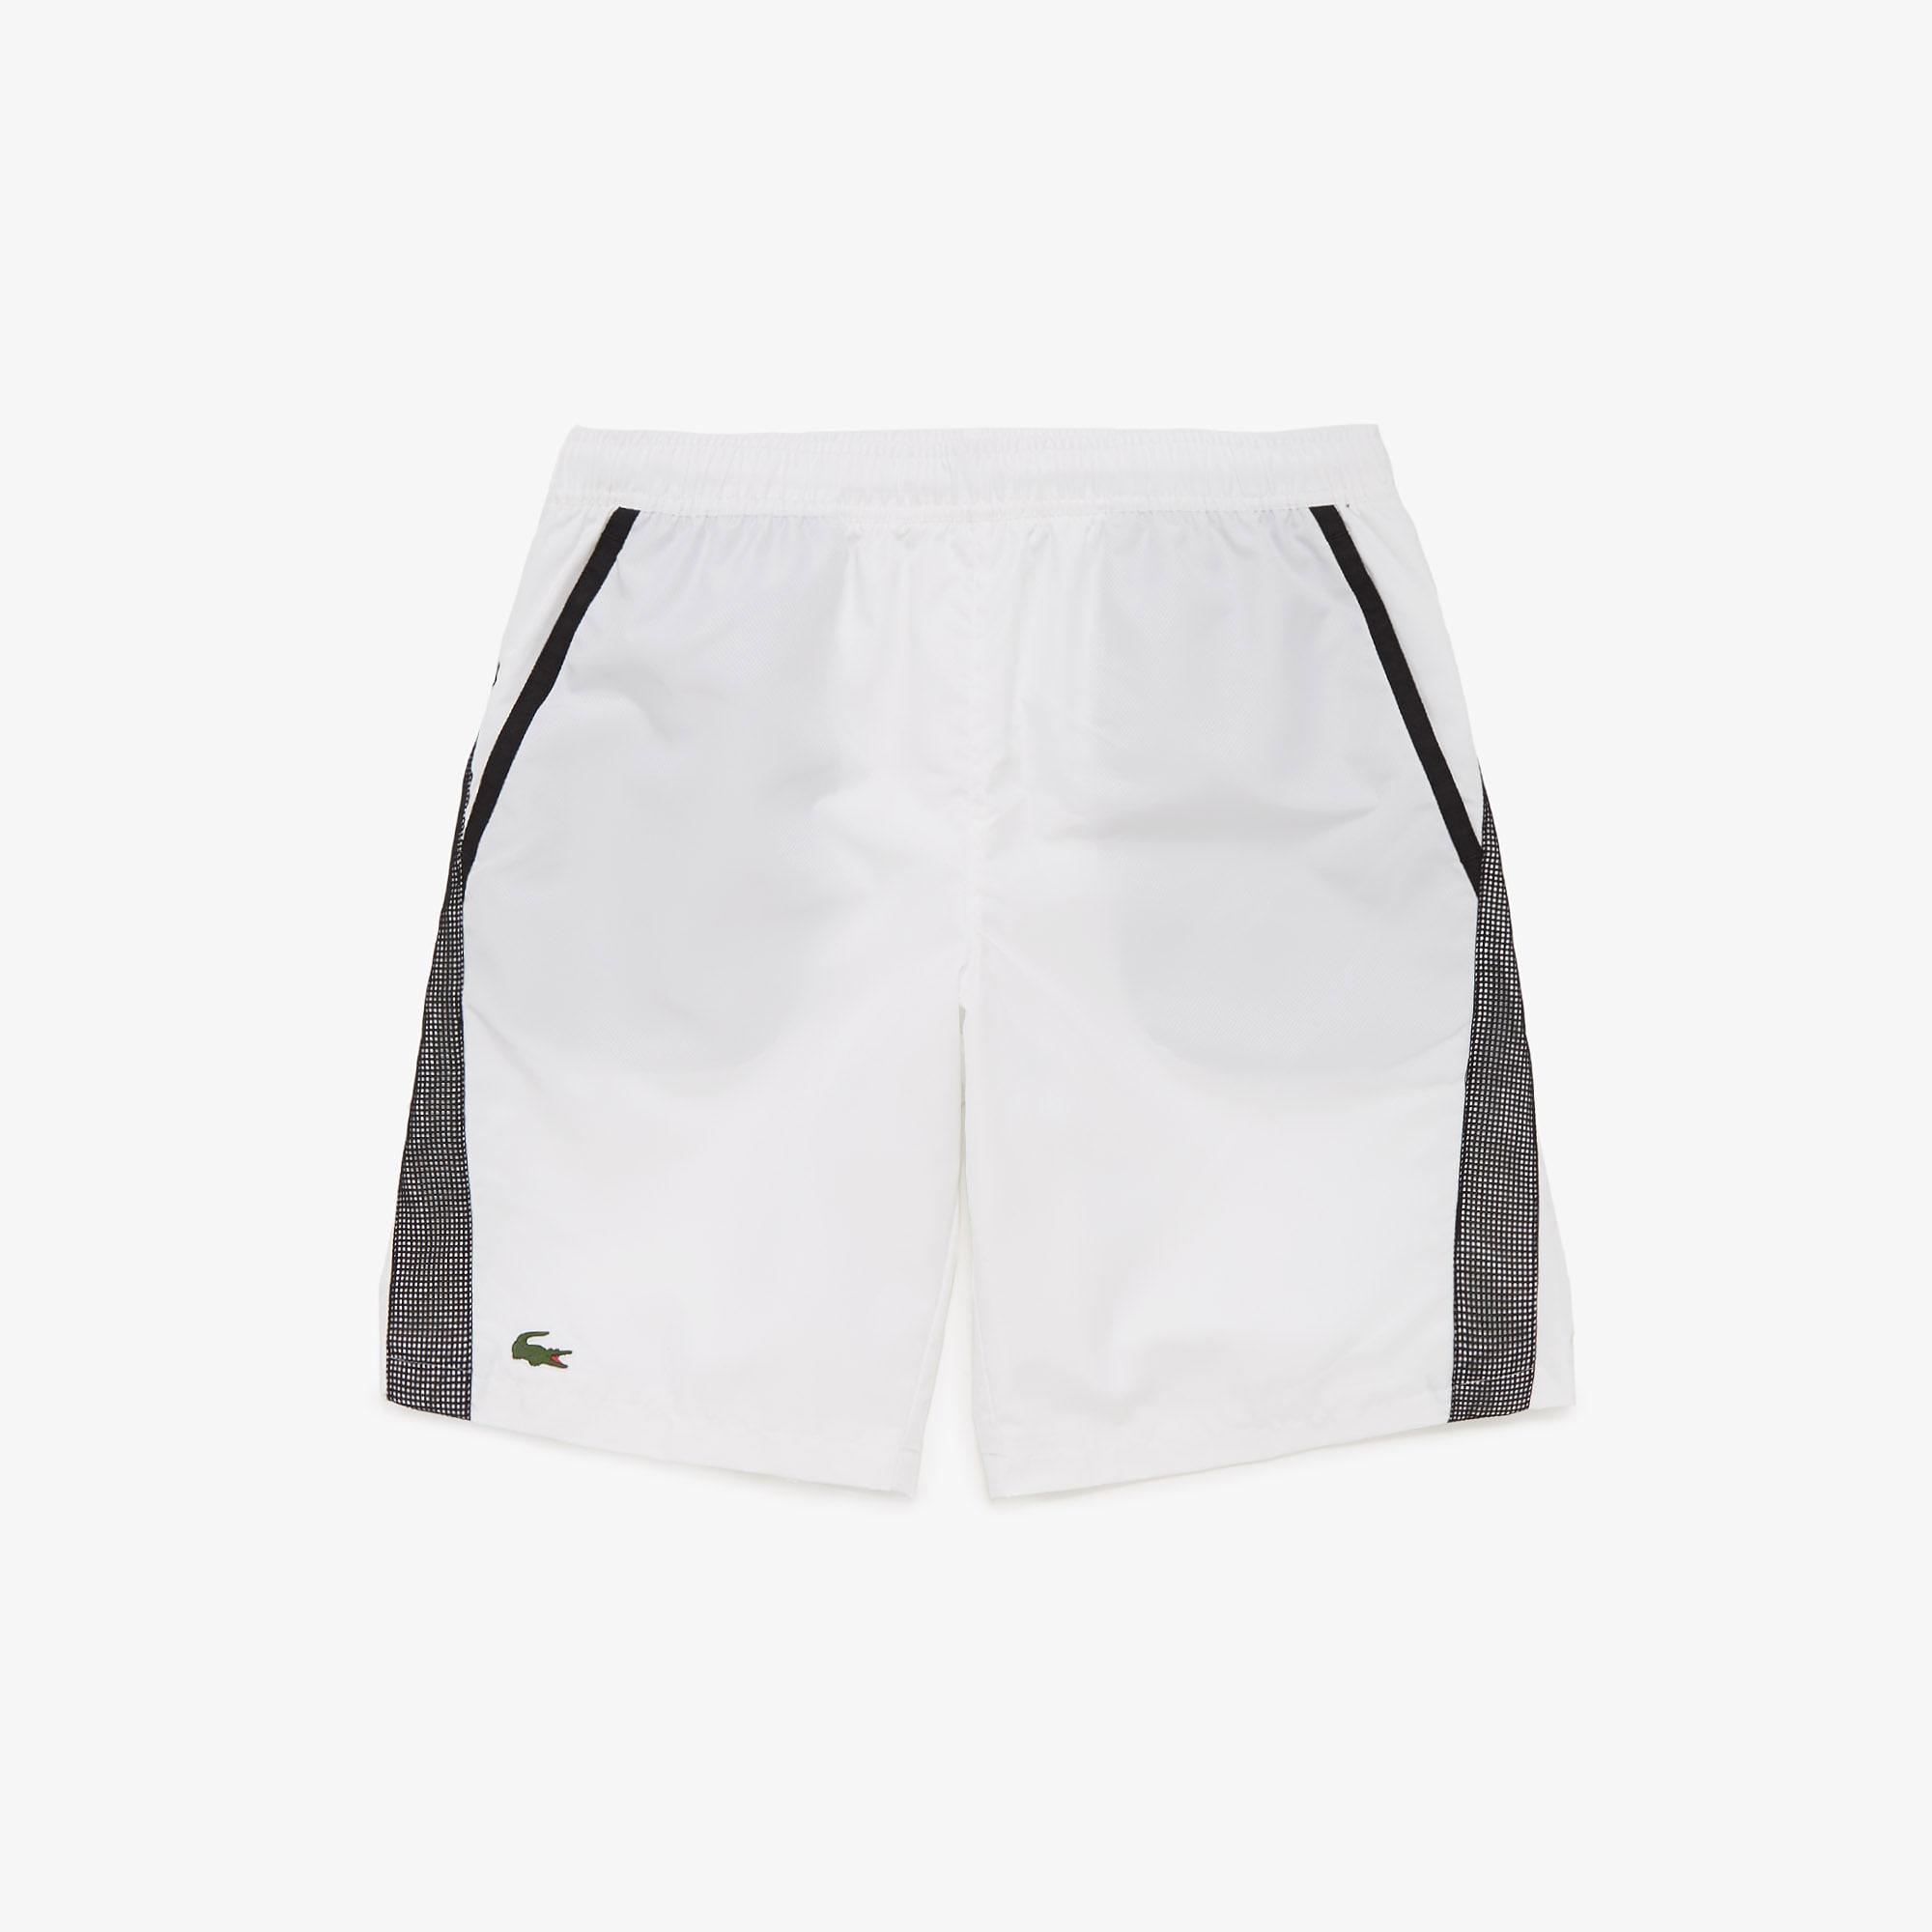 Lacoste Sport Contrast Bands Lightweight Tennis Shorts in White,Black ...